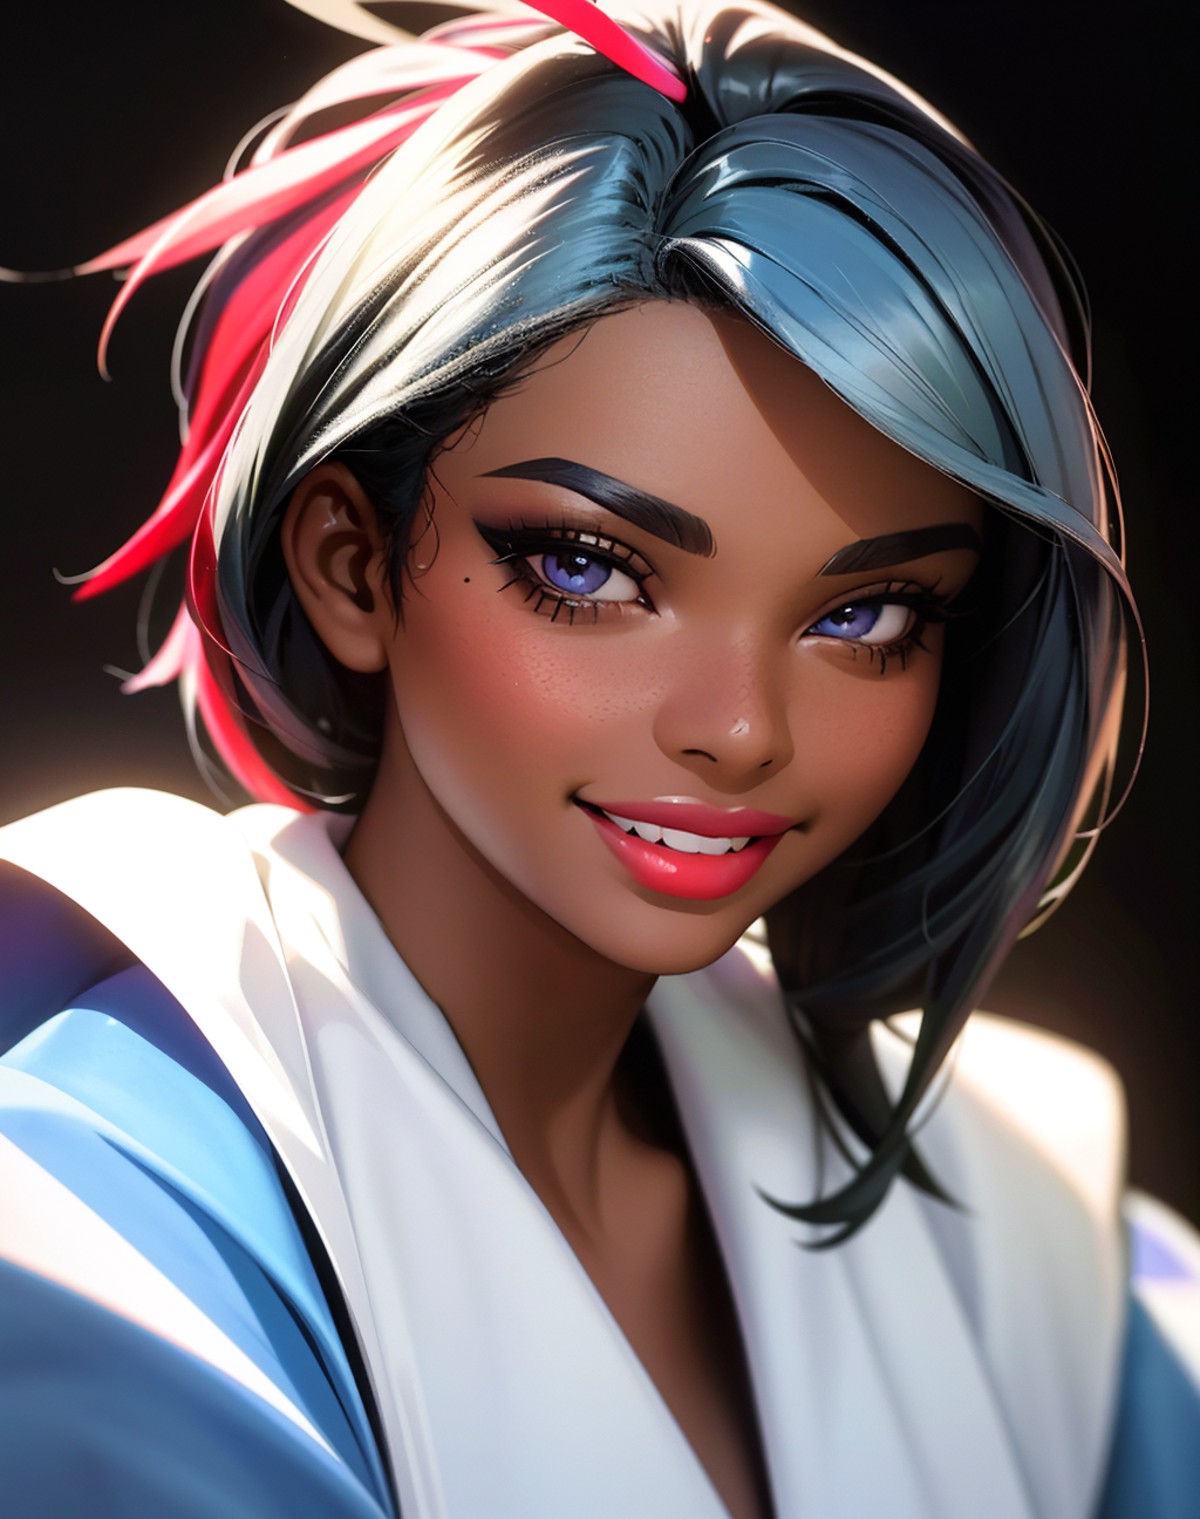 ((Masterpiece, best quality,edgQuality)),smiling,excited,portrait,
edgGUY_woman,edgGUY_face,edg_GUY,dark skin, a woman in ...